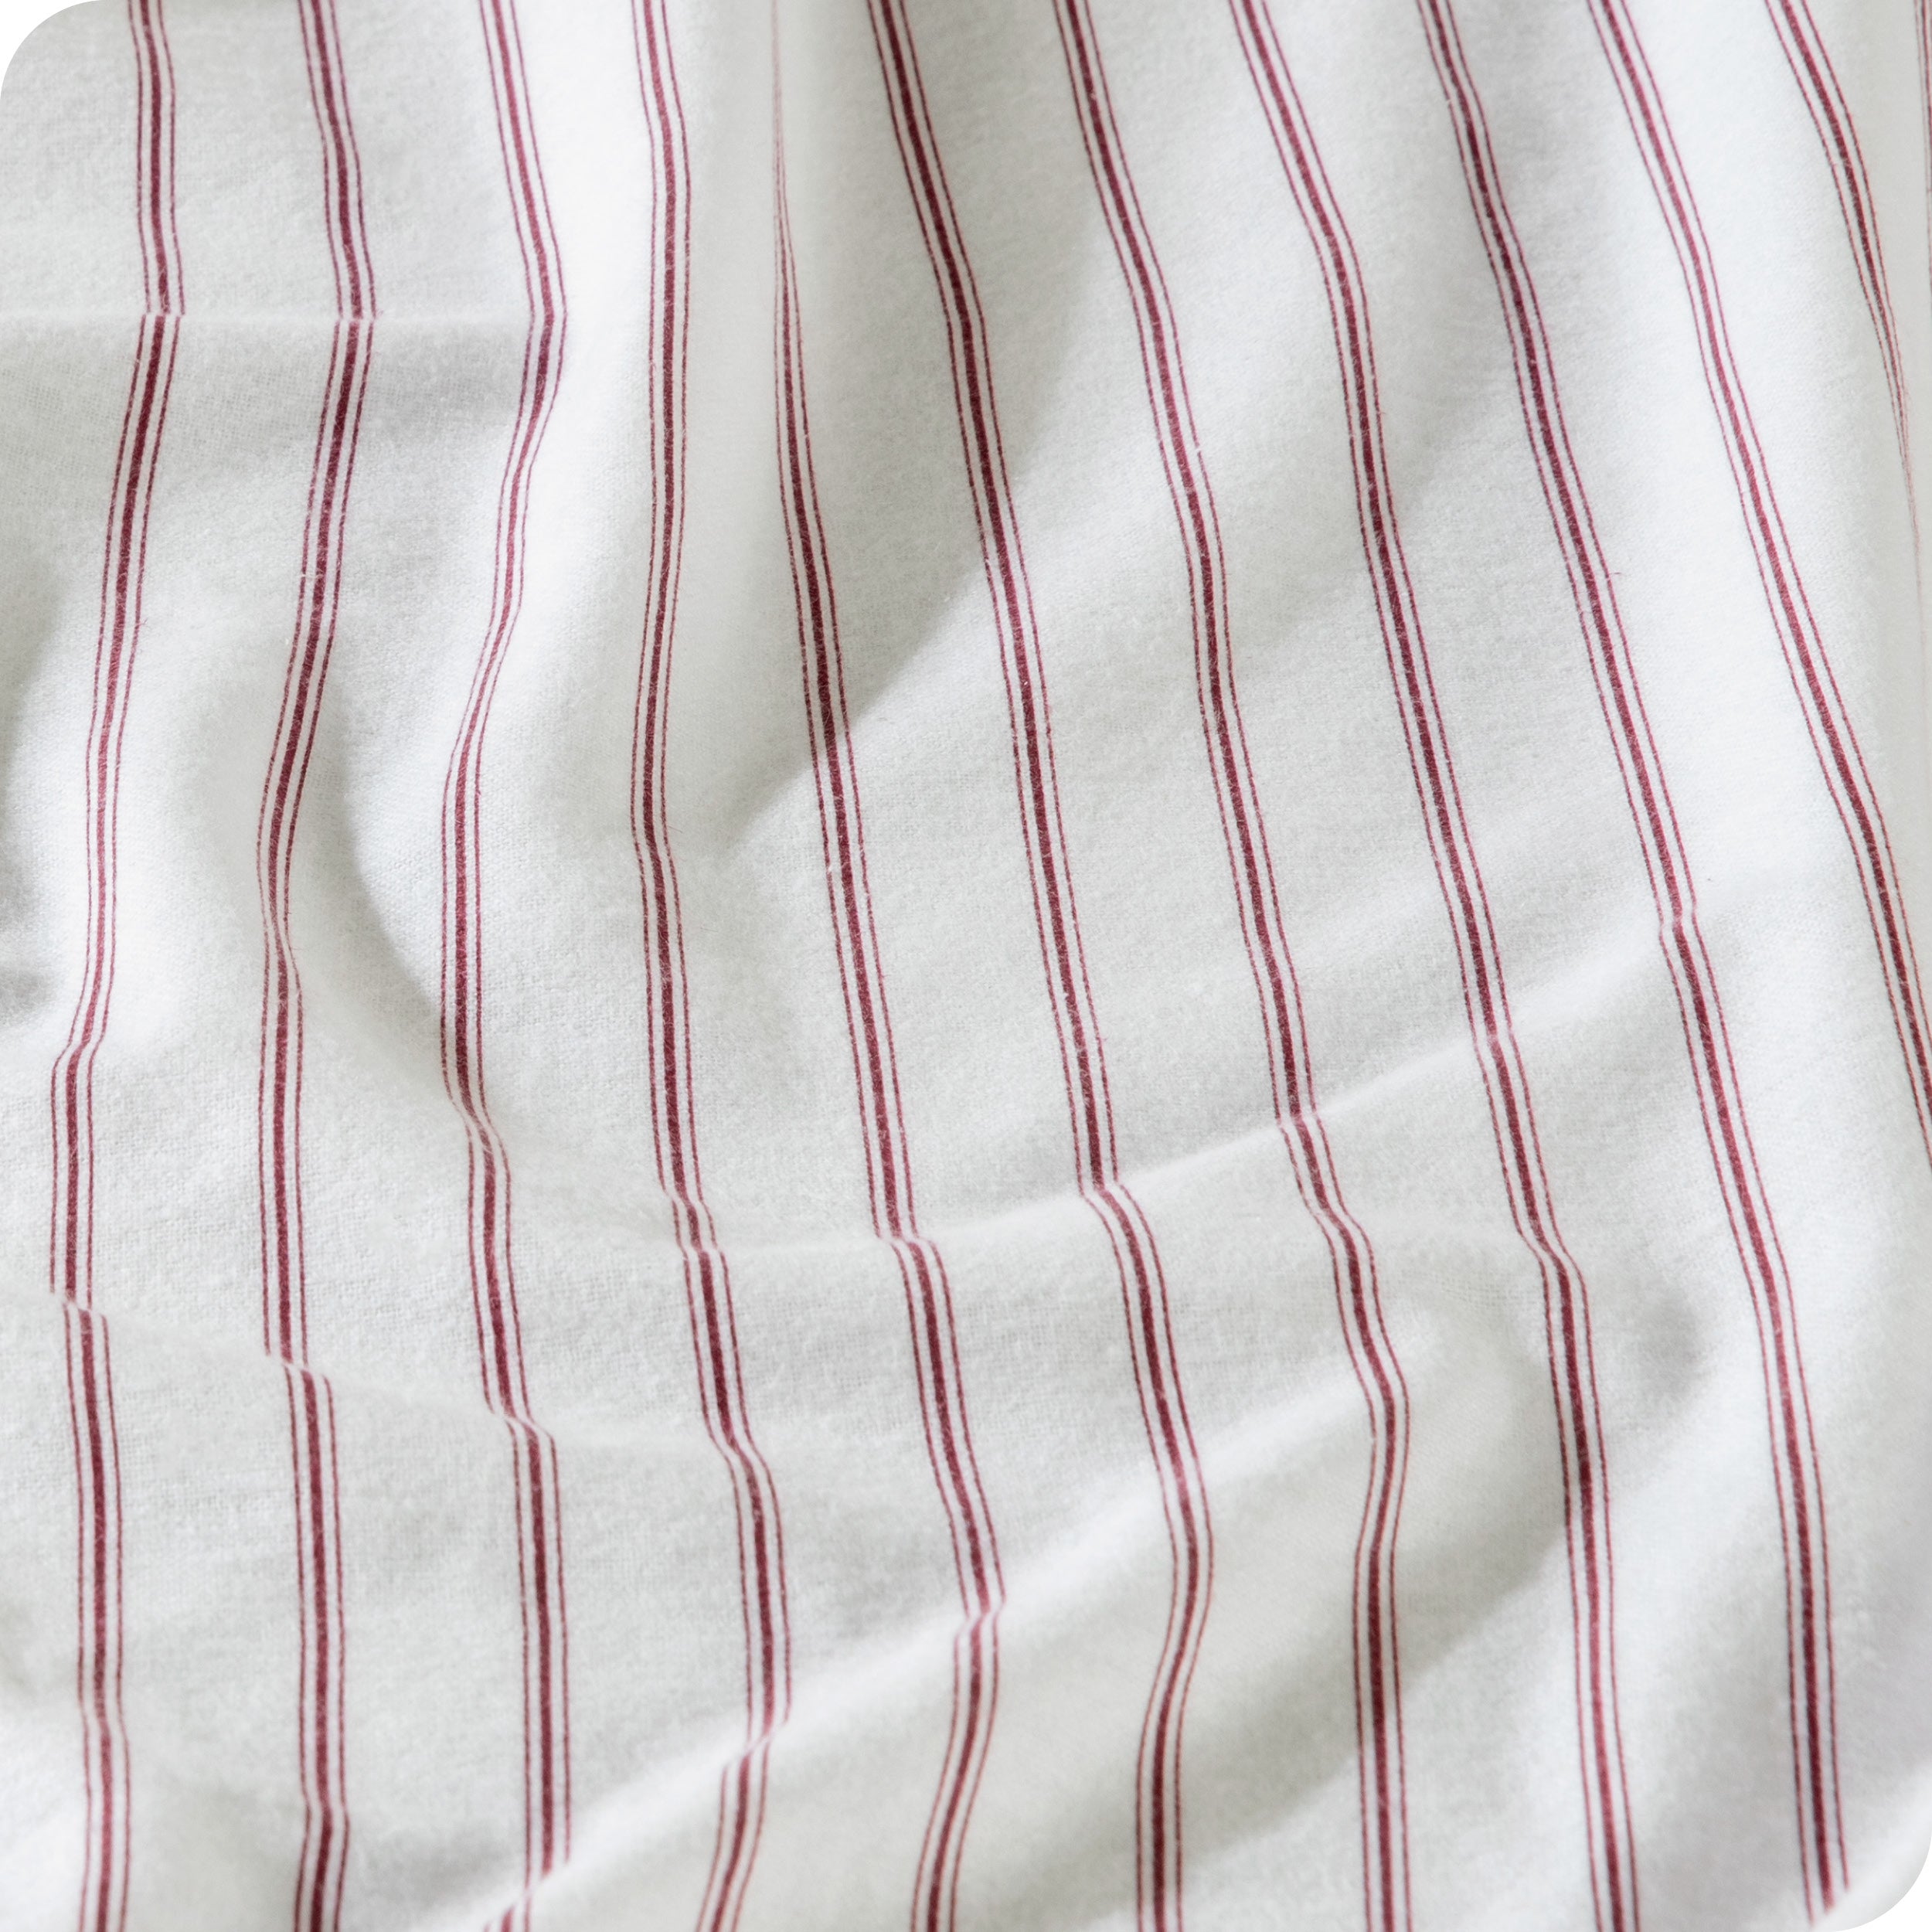 Close in view showing texture of sheet set fabric